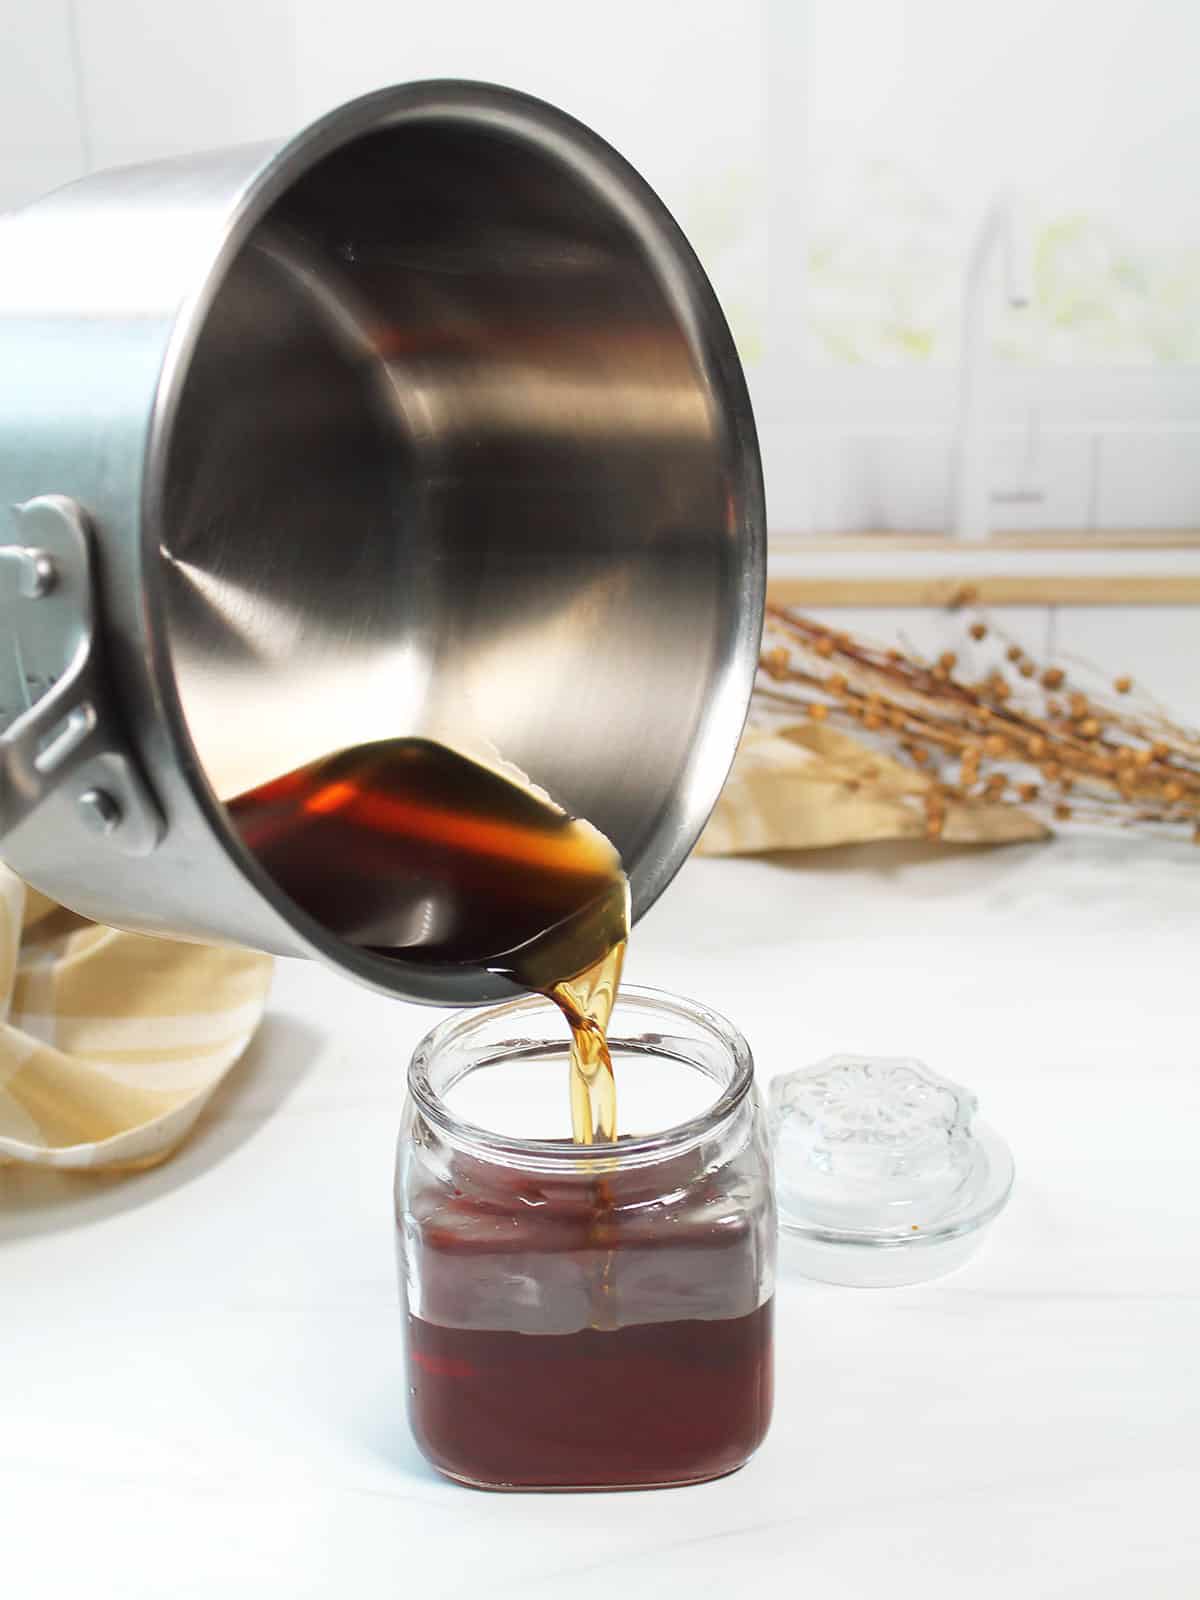 Pouring brown sugar syrup into glass jar.